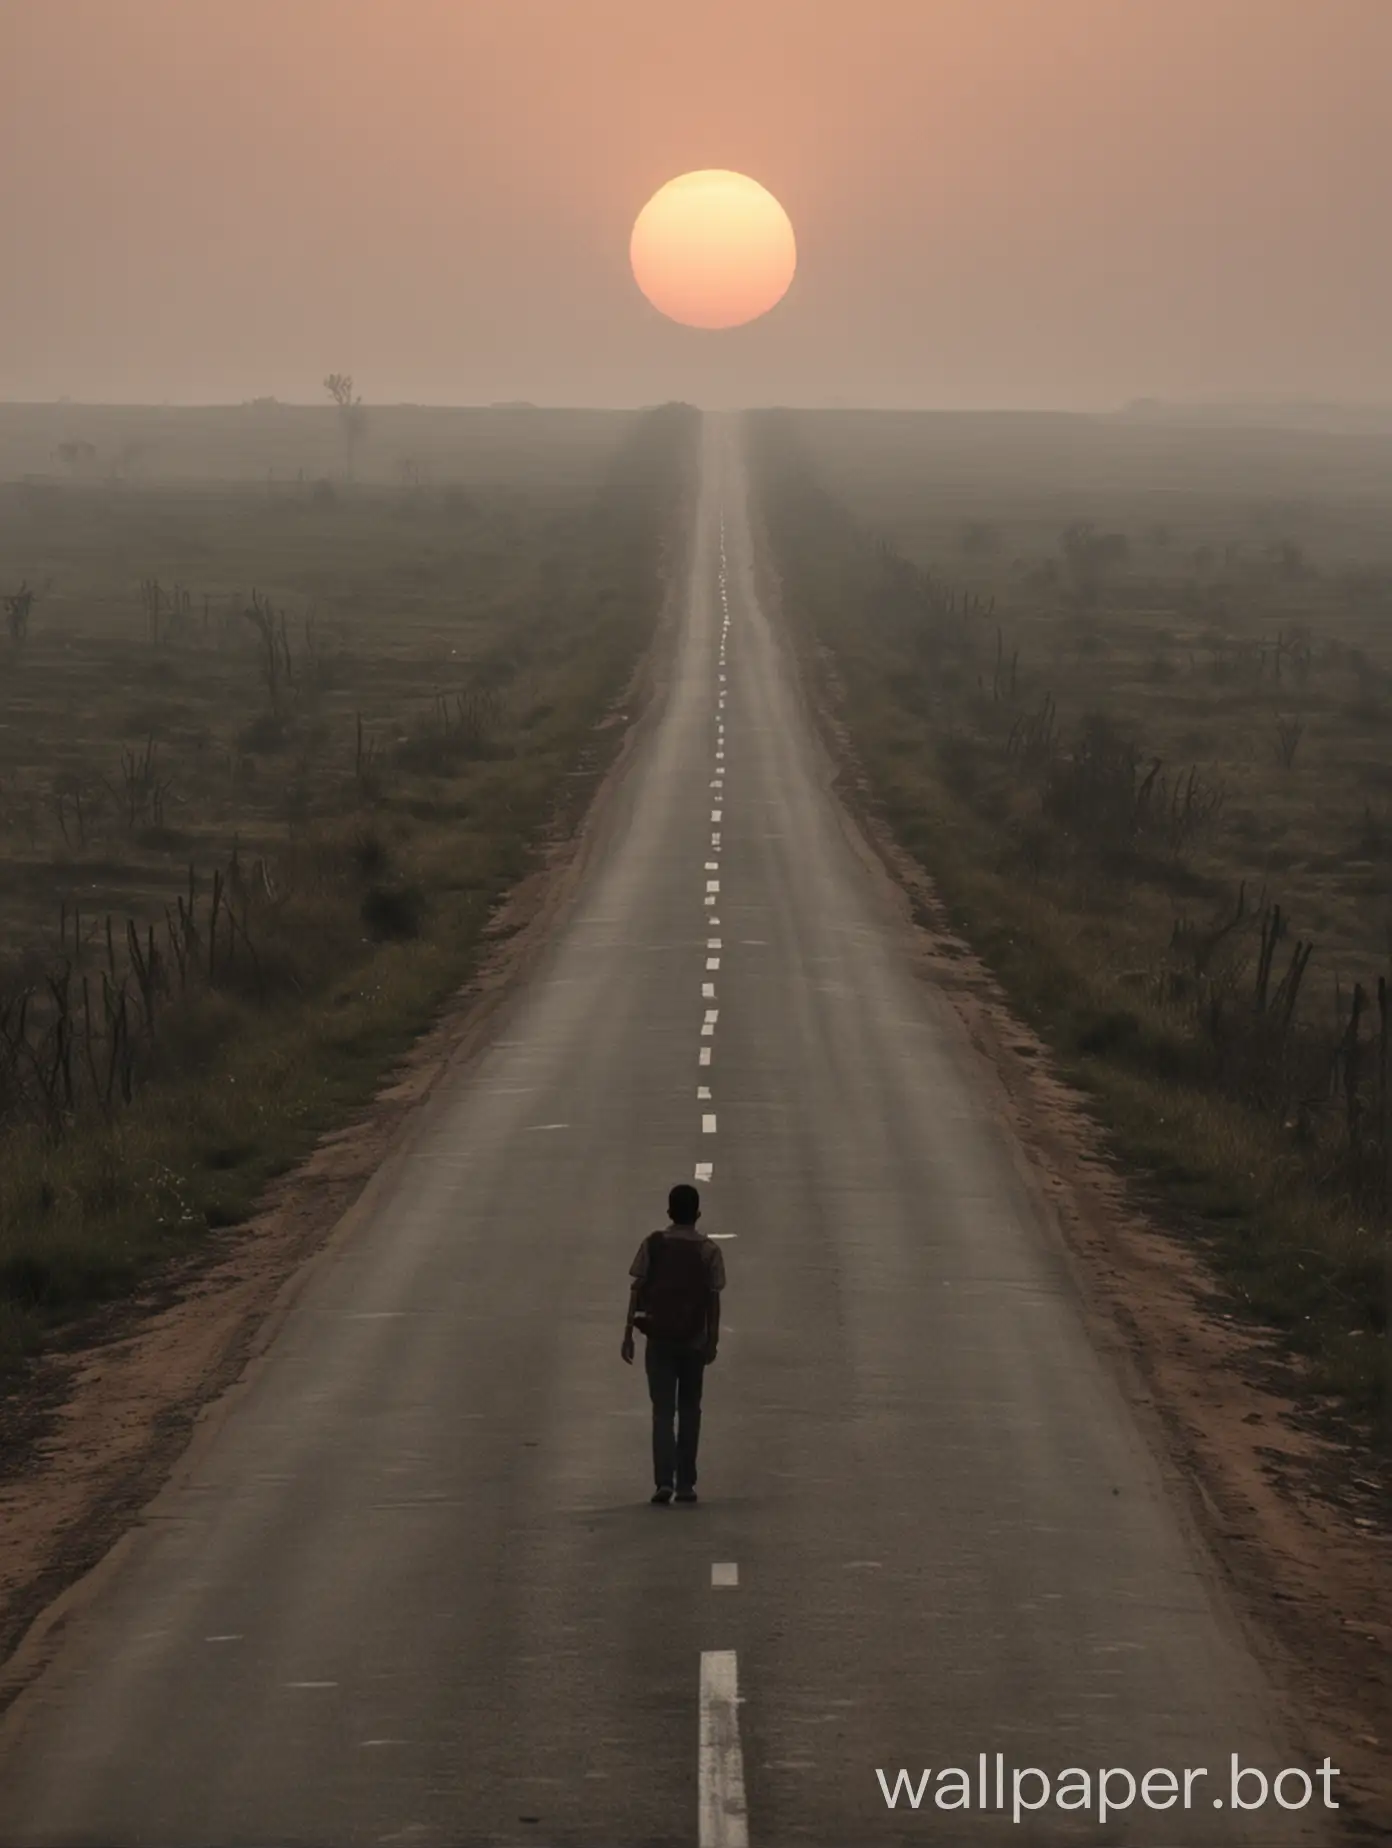 A man alone in the long road at evening